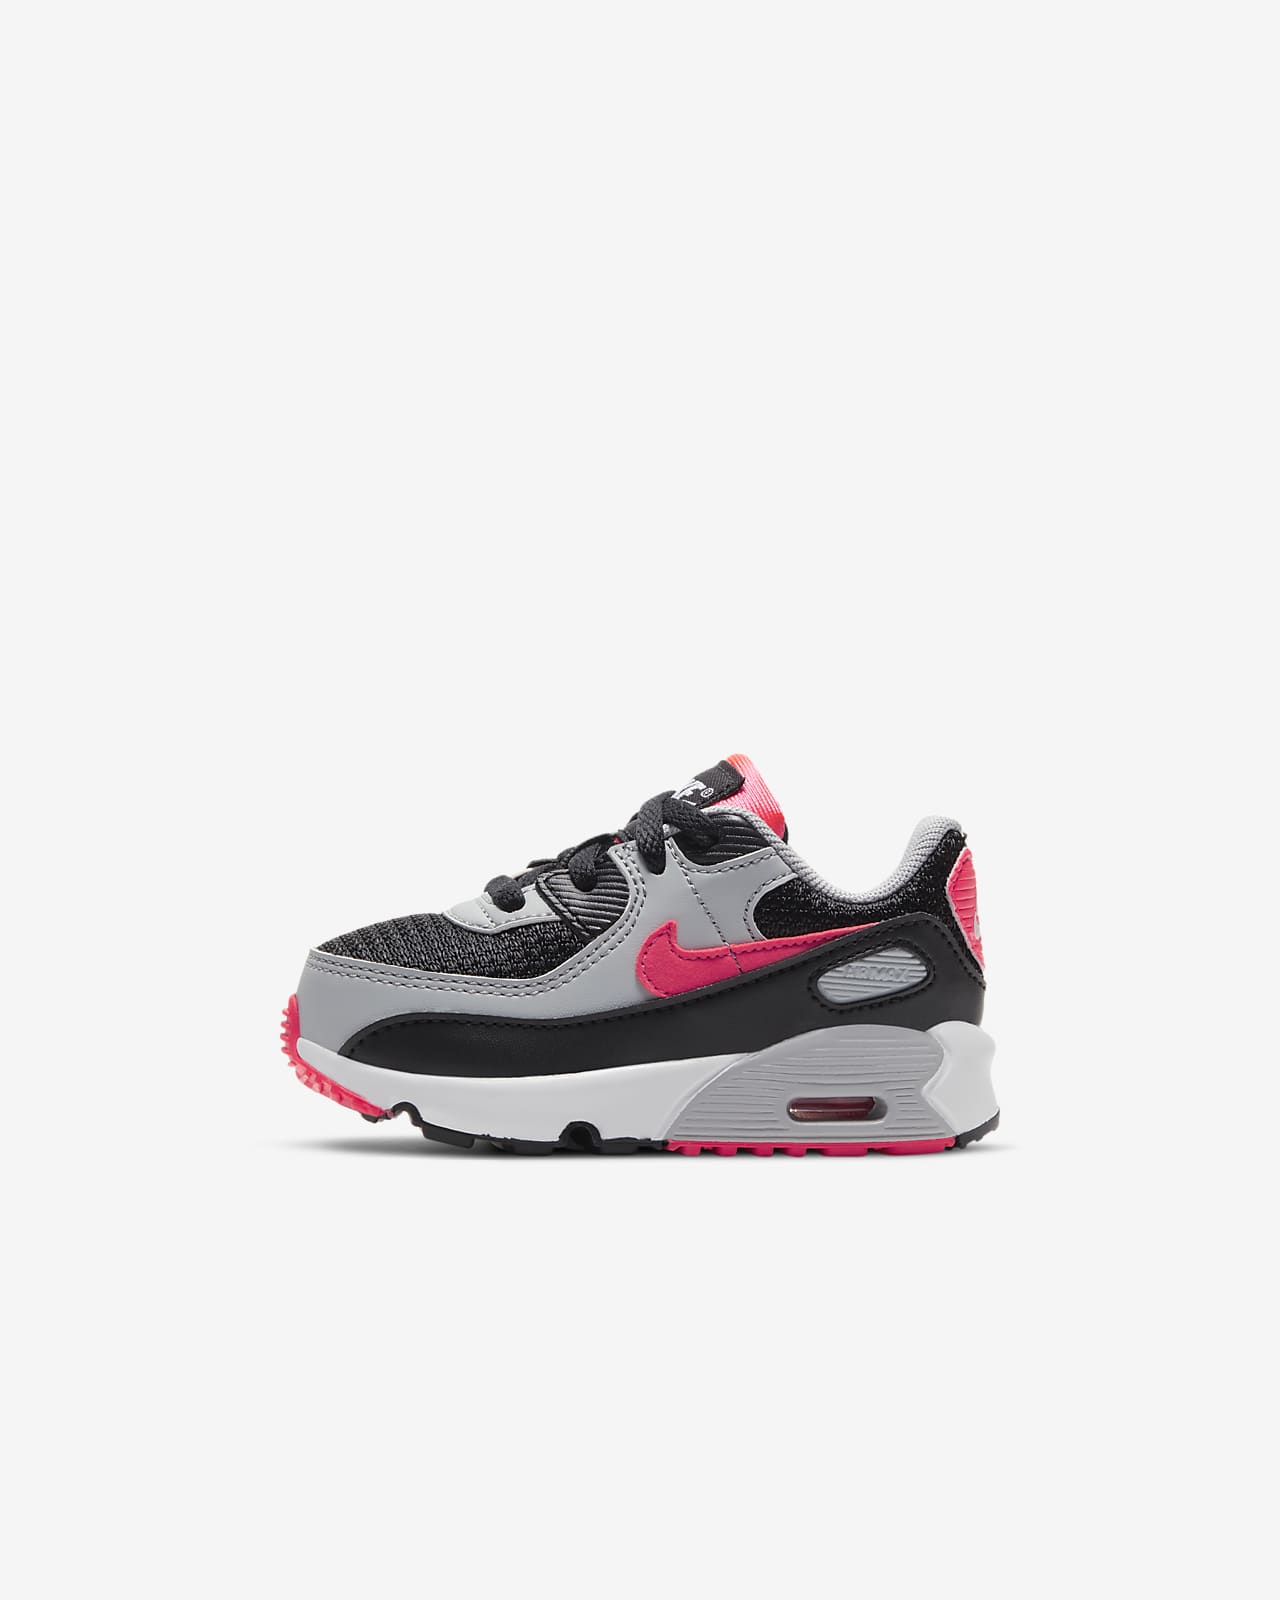 Nike Air Max 90 Ltr Baby/Toddler Shoes. Nike Vn